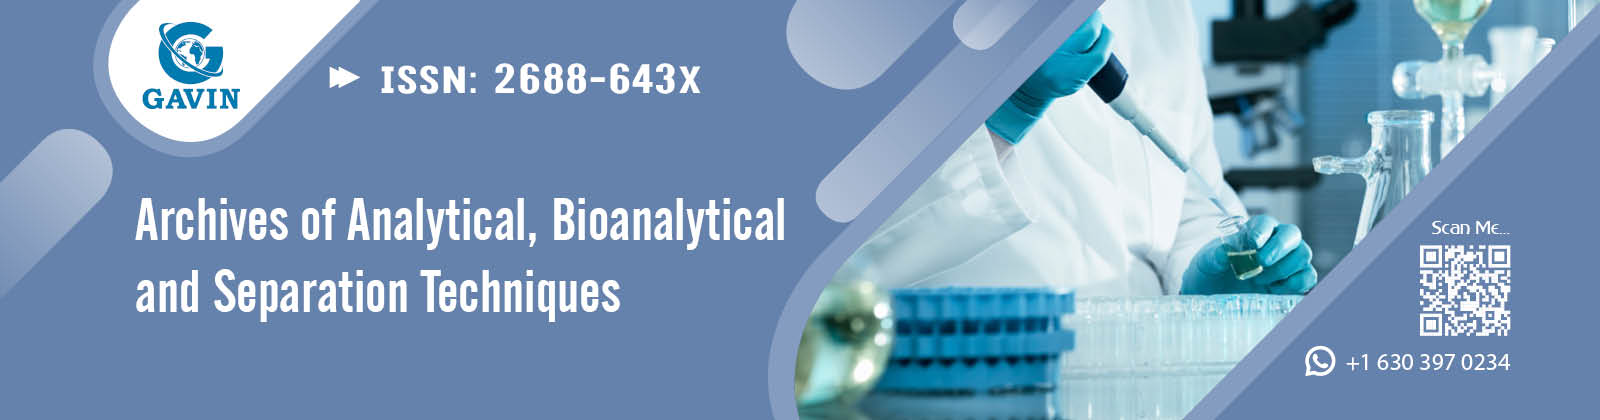 Archives of Analytical, Bioanalytical and Separation Techniques